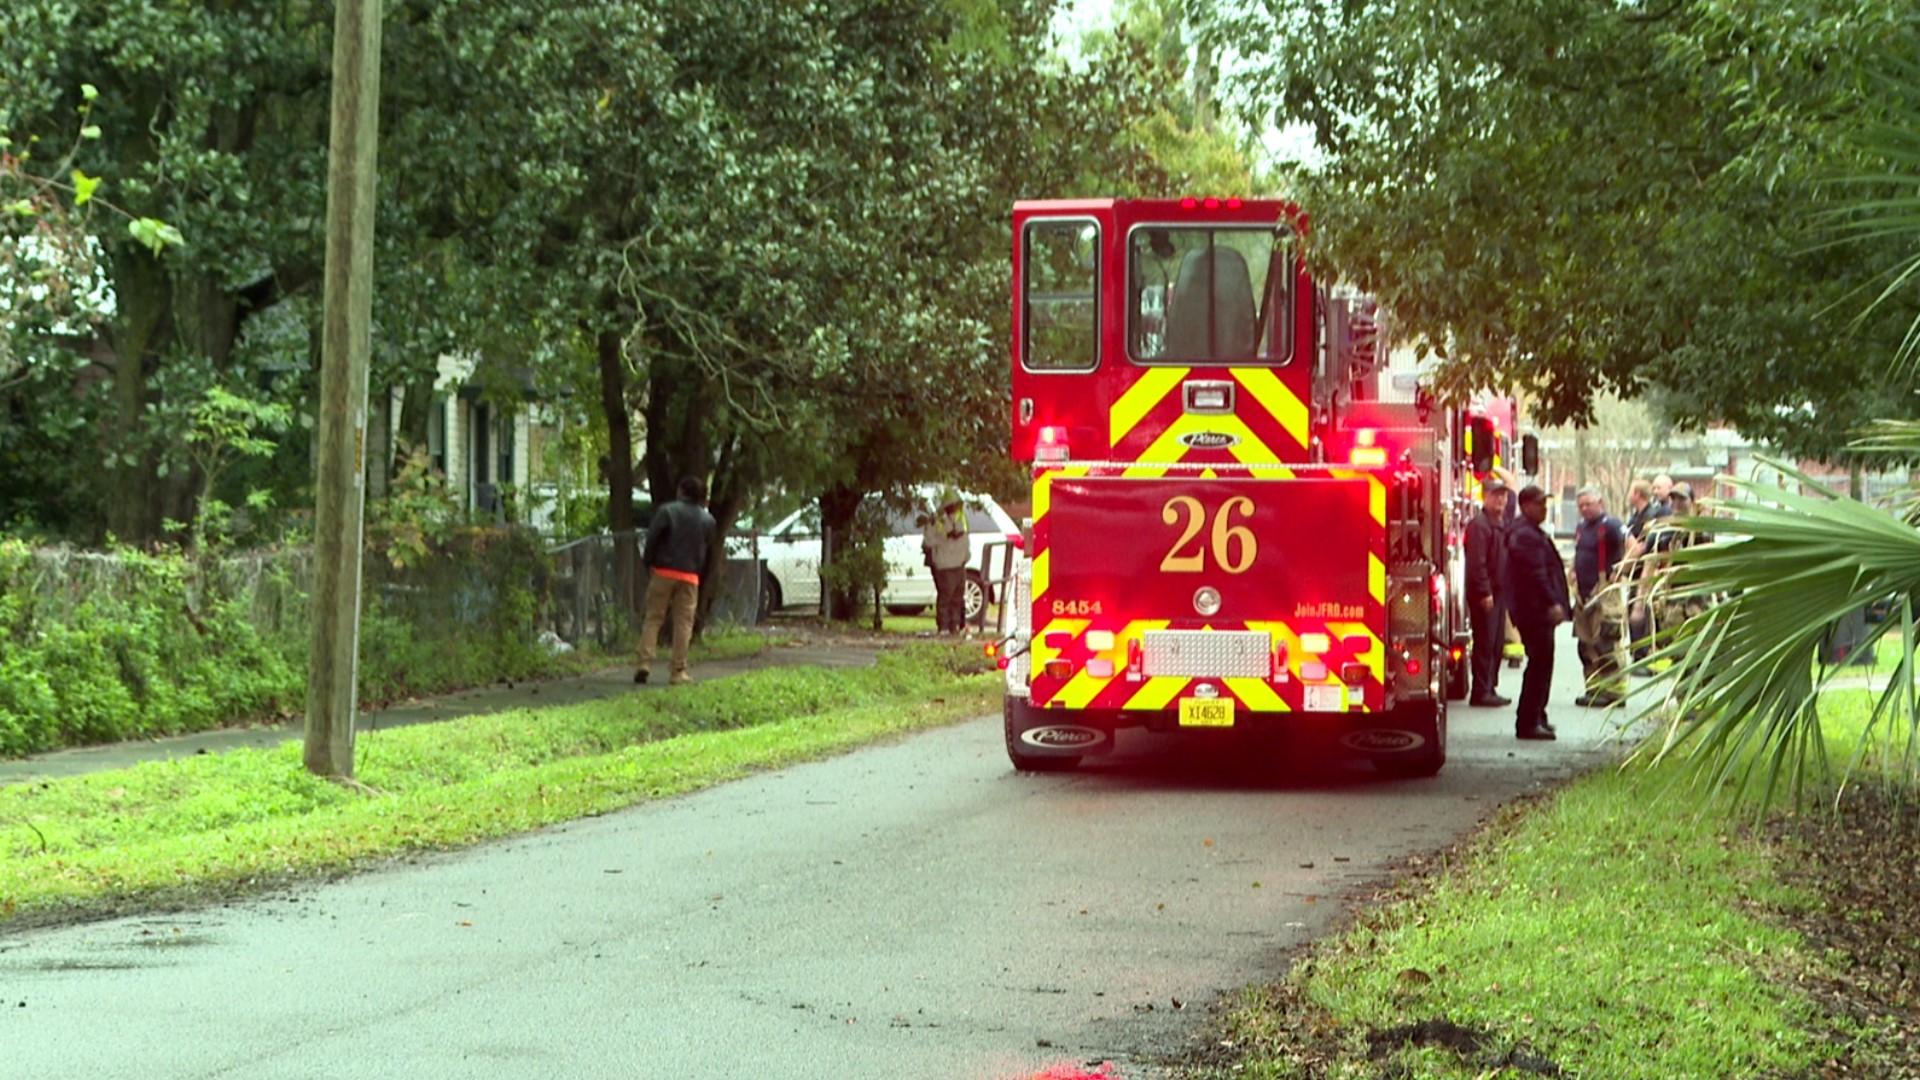 The Jacksonville Fire and Rescue Department says the fire occurred in the 4500 block of Hunt Street Friday morning.